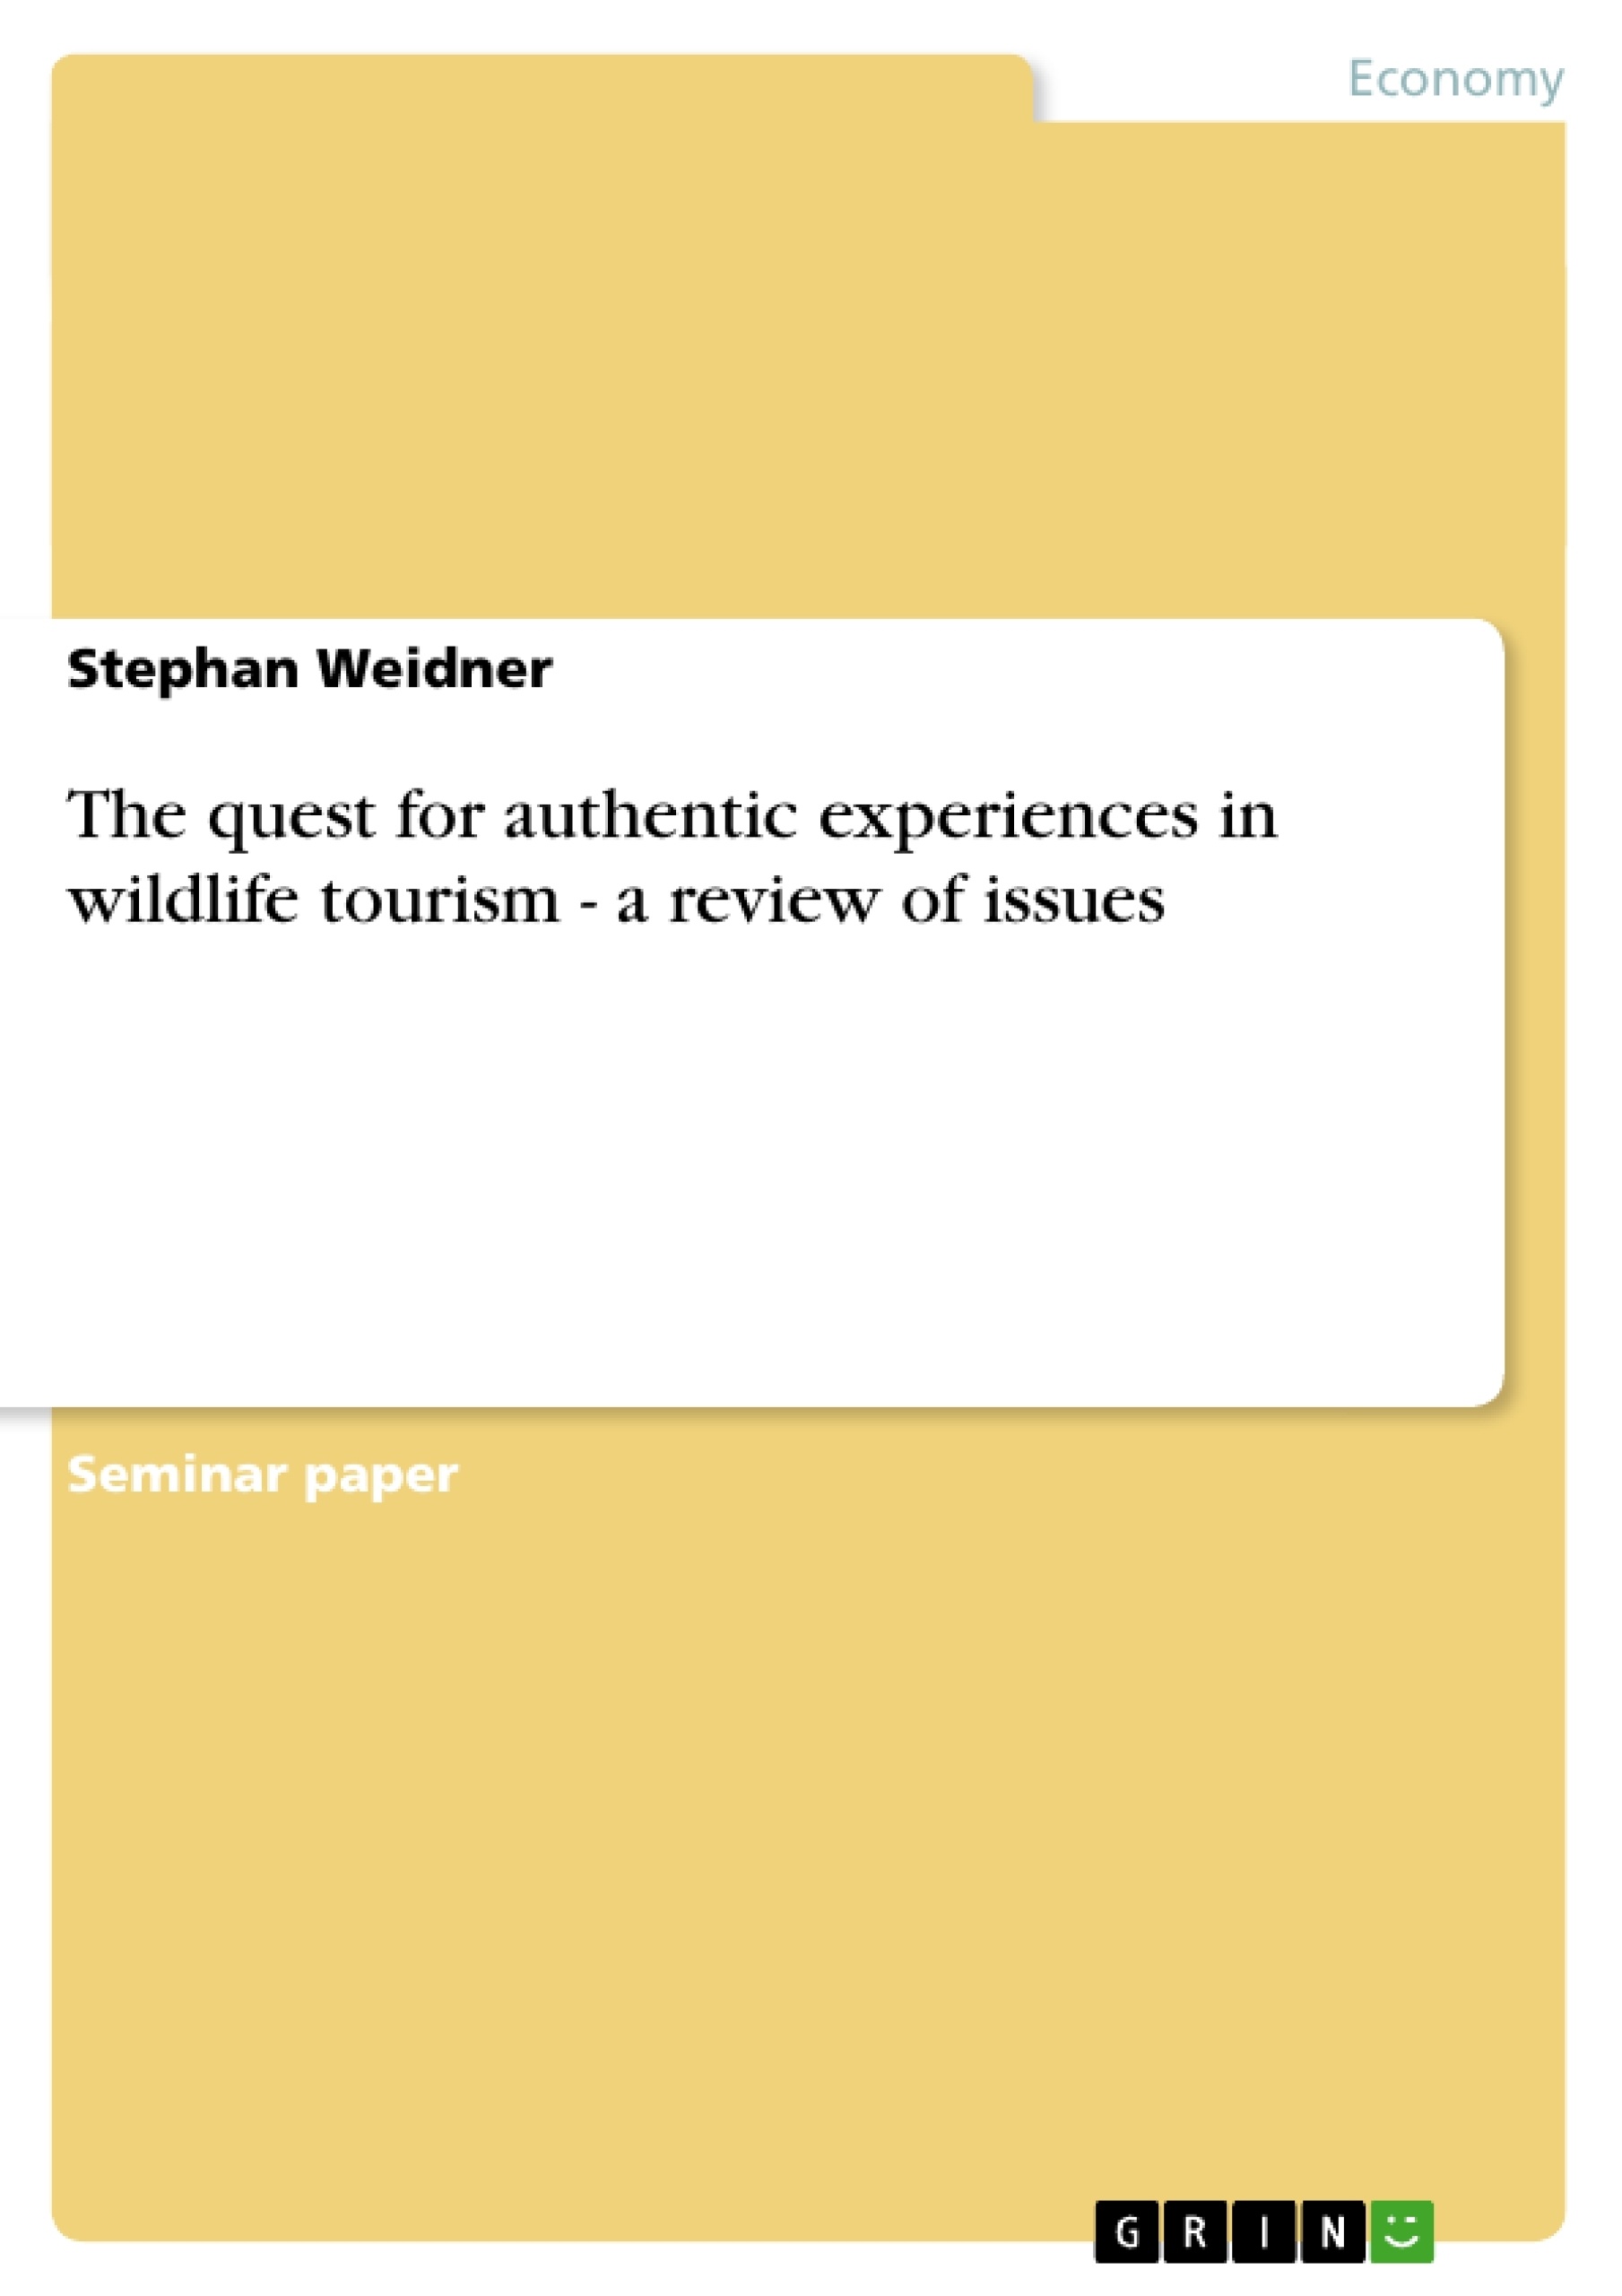 Title: The quest for authentic experiences in wildlife tourism - a review of issues